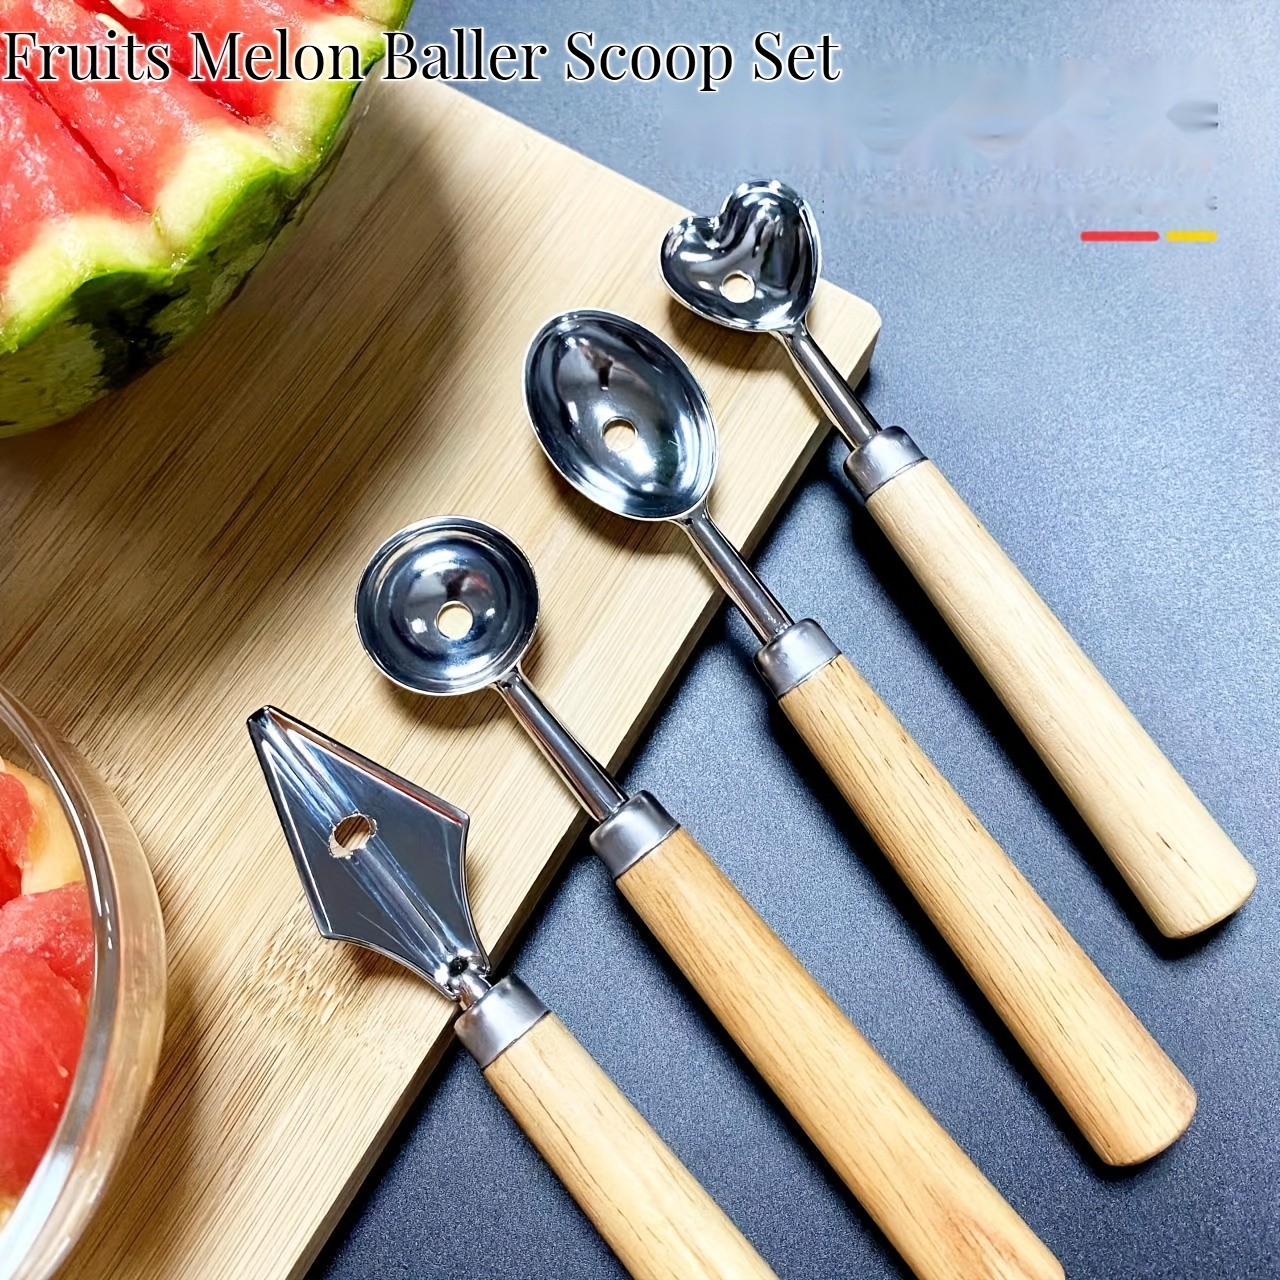 5Pcs Melon Baller Scoop Set, 4 in 1 Stainless Steel Fruit Scooper Seed  Remover Cutter, Double Sided Melon Baller Spoon, Avocado Cutter, Watermelon